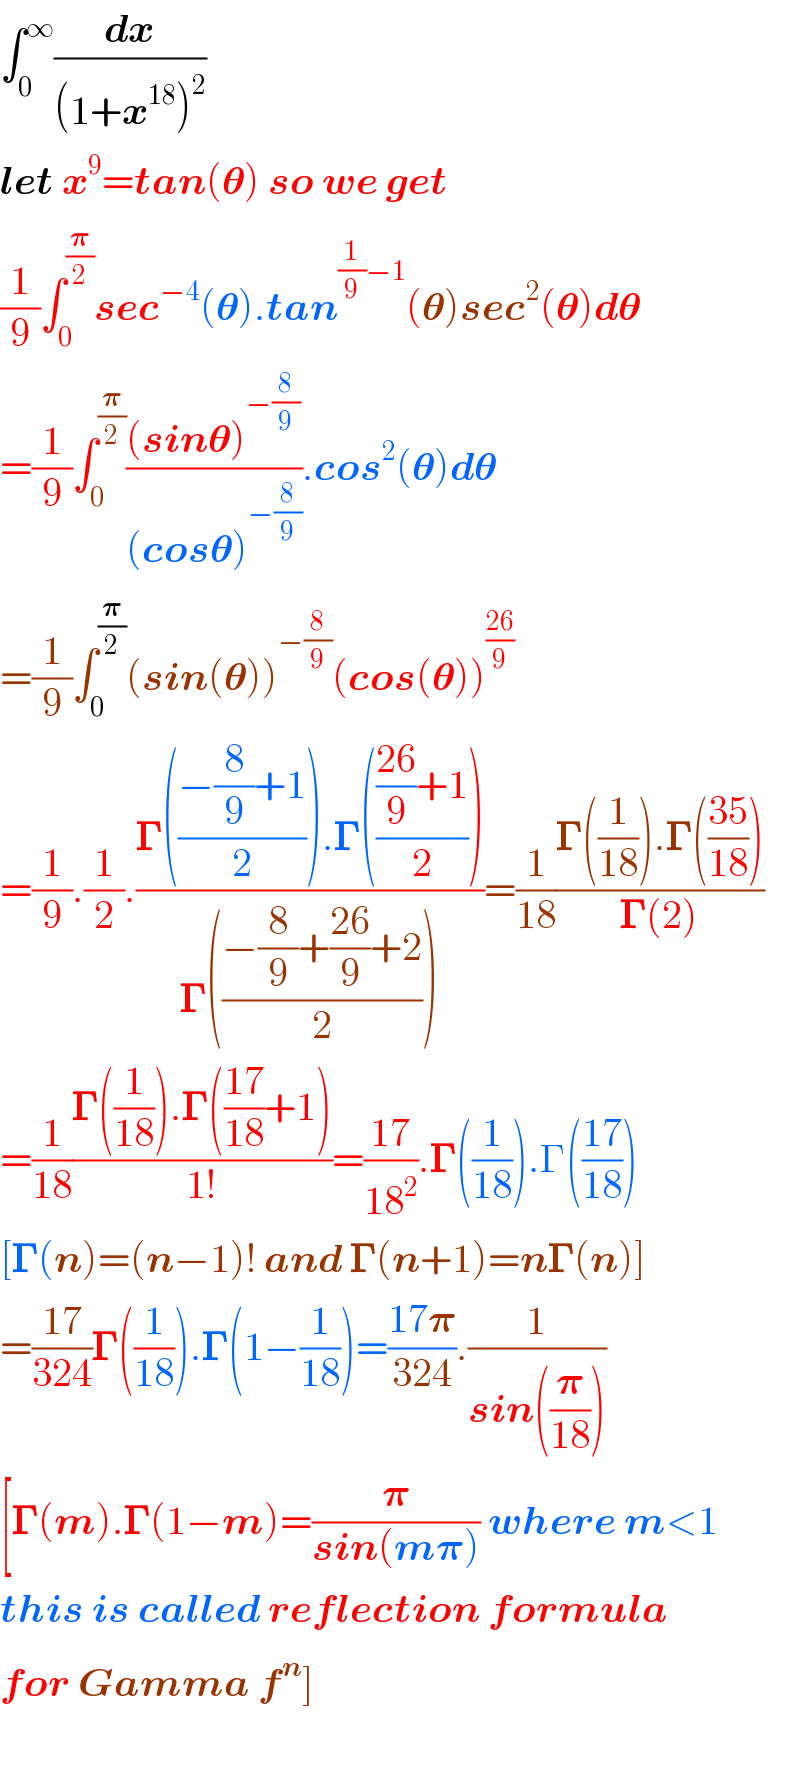 ∫_0 ^∞ (dx/((1+x^(18) )^2 ))  let x^9 =tan(𝛉) so we get  (1/9)∫_0 ^(𝛑/2) sec^(−4) (𝛉).tan^((1/9)−1) (𝛉)sec^2 (𝛉)d𝛉  =(1/9)∫_0 ^(𝛑/2) (((sin𝛉)^(−(8/9)) )/((cos𝛉)^(−(8/9)) )).cos^2 (𝛉)d𝛉  =(1/9)∫_0 ^(𝛑/2) (sin(𝛉))^(−(8/9)) (cos(𝛉))^((26)/9)   =(1/9).(1/2).((𝚪(((−(8/9)+1)/2)).𝚪(((((26)/9)+1)/2)))/(𝚪(((−(8/9)+((26)/9)+2)/2))))=(1/(18))((𝚪((1/(18))).𝚪(((35)/(18))))/(𝚪(2)))  =(1/(18))((𝚪((1/(18))).𝚪(((17)/(18))+1))/(1!))=((17)/(18^2 )).𝚪((1/(18))).Γ(((17)/(18)))  [𝚪(n)=(n−1)! and 𝚪(n+1)=n𝚪(n)]  =((17)/(324))𝚪((1/(18))).𝚪(1−(1/(18)))=((17𝛑)/(324)).(1/(sin((𝛑/(18)))))  [𝚪(m).𝚪(1−m)=(𝛑/(sin(m𝛑))) where m<1  this is called reflection formula  for Gamma f^n ]    